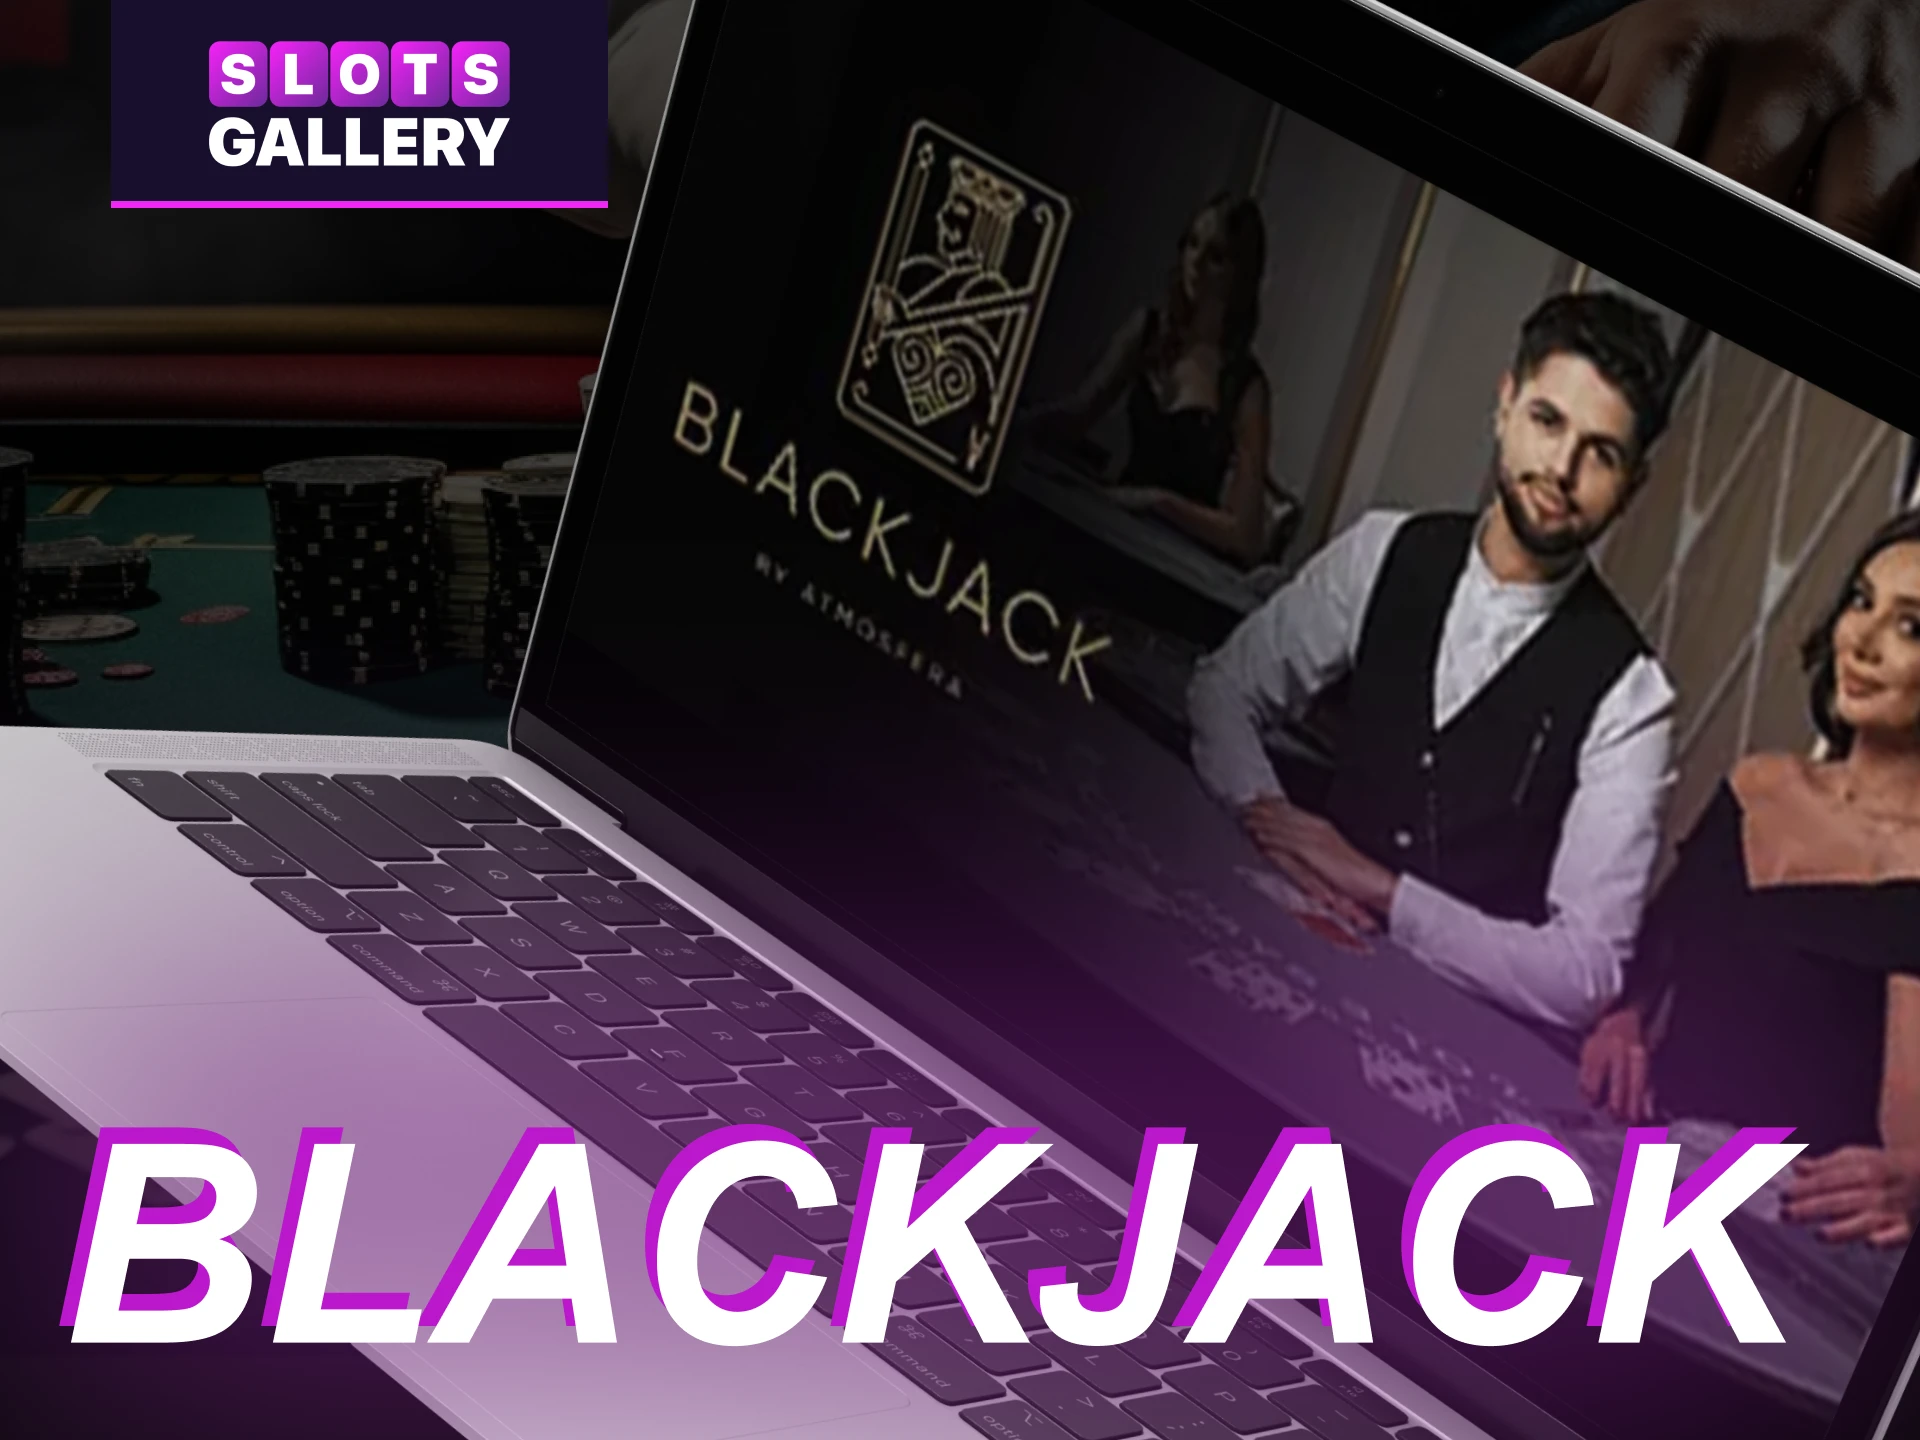 What BlackJack games are there in the online casino Slots Gallery.